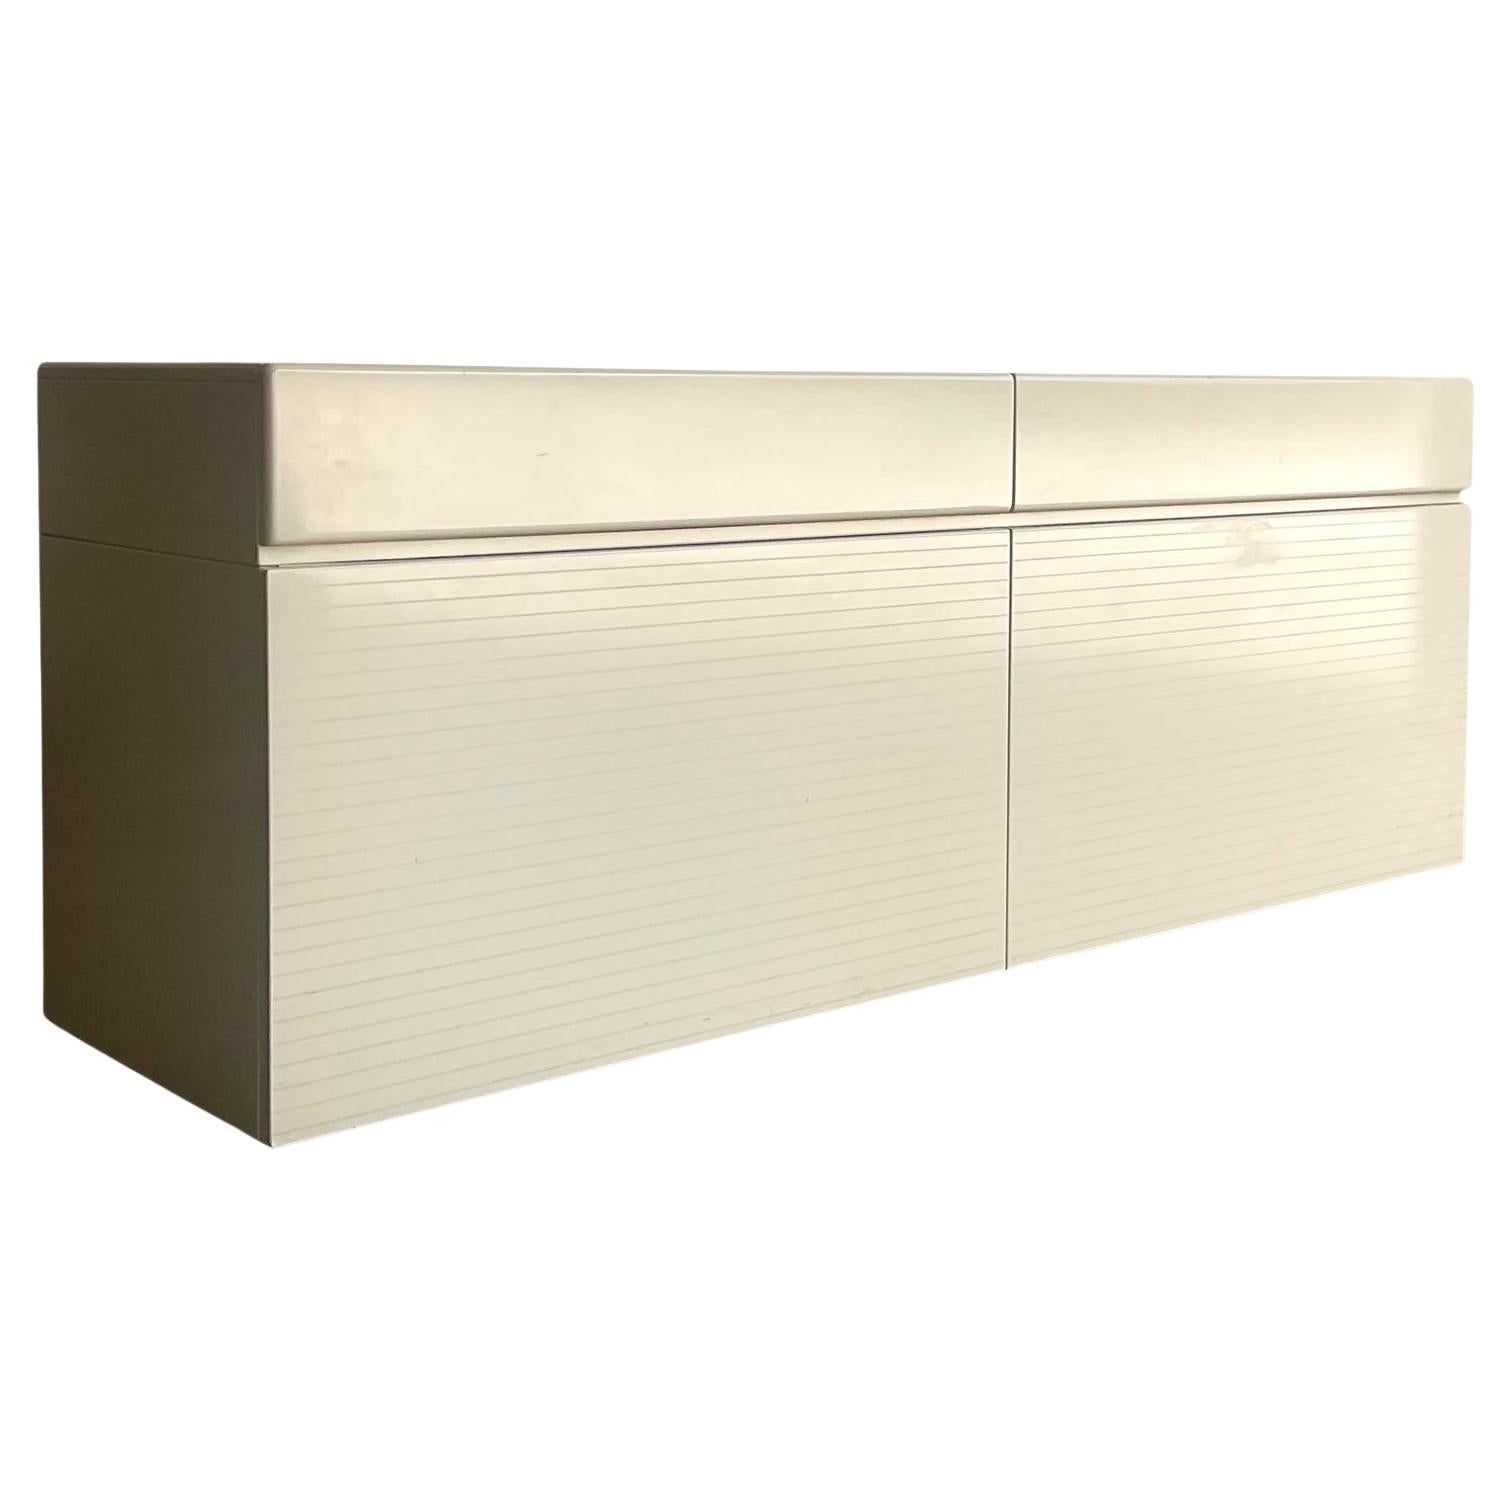 Vintage Rougier High Gloss Lacquered Stripe Credenza